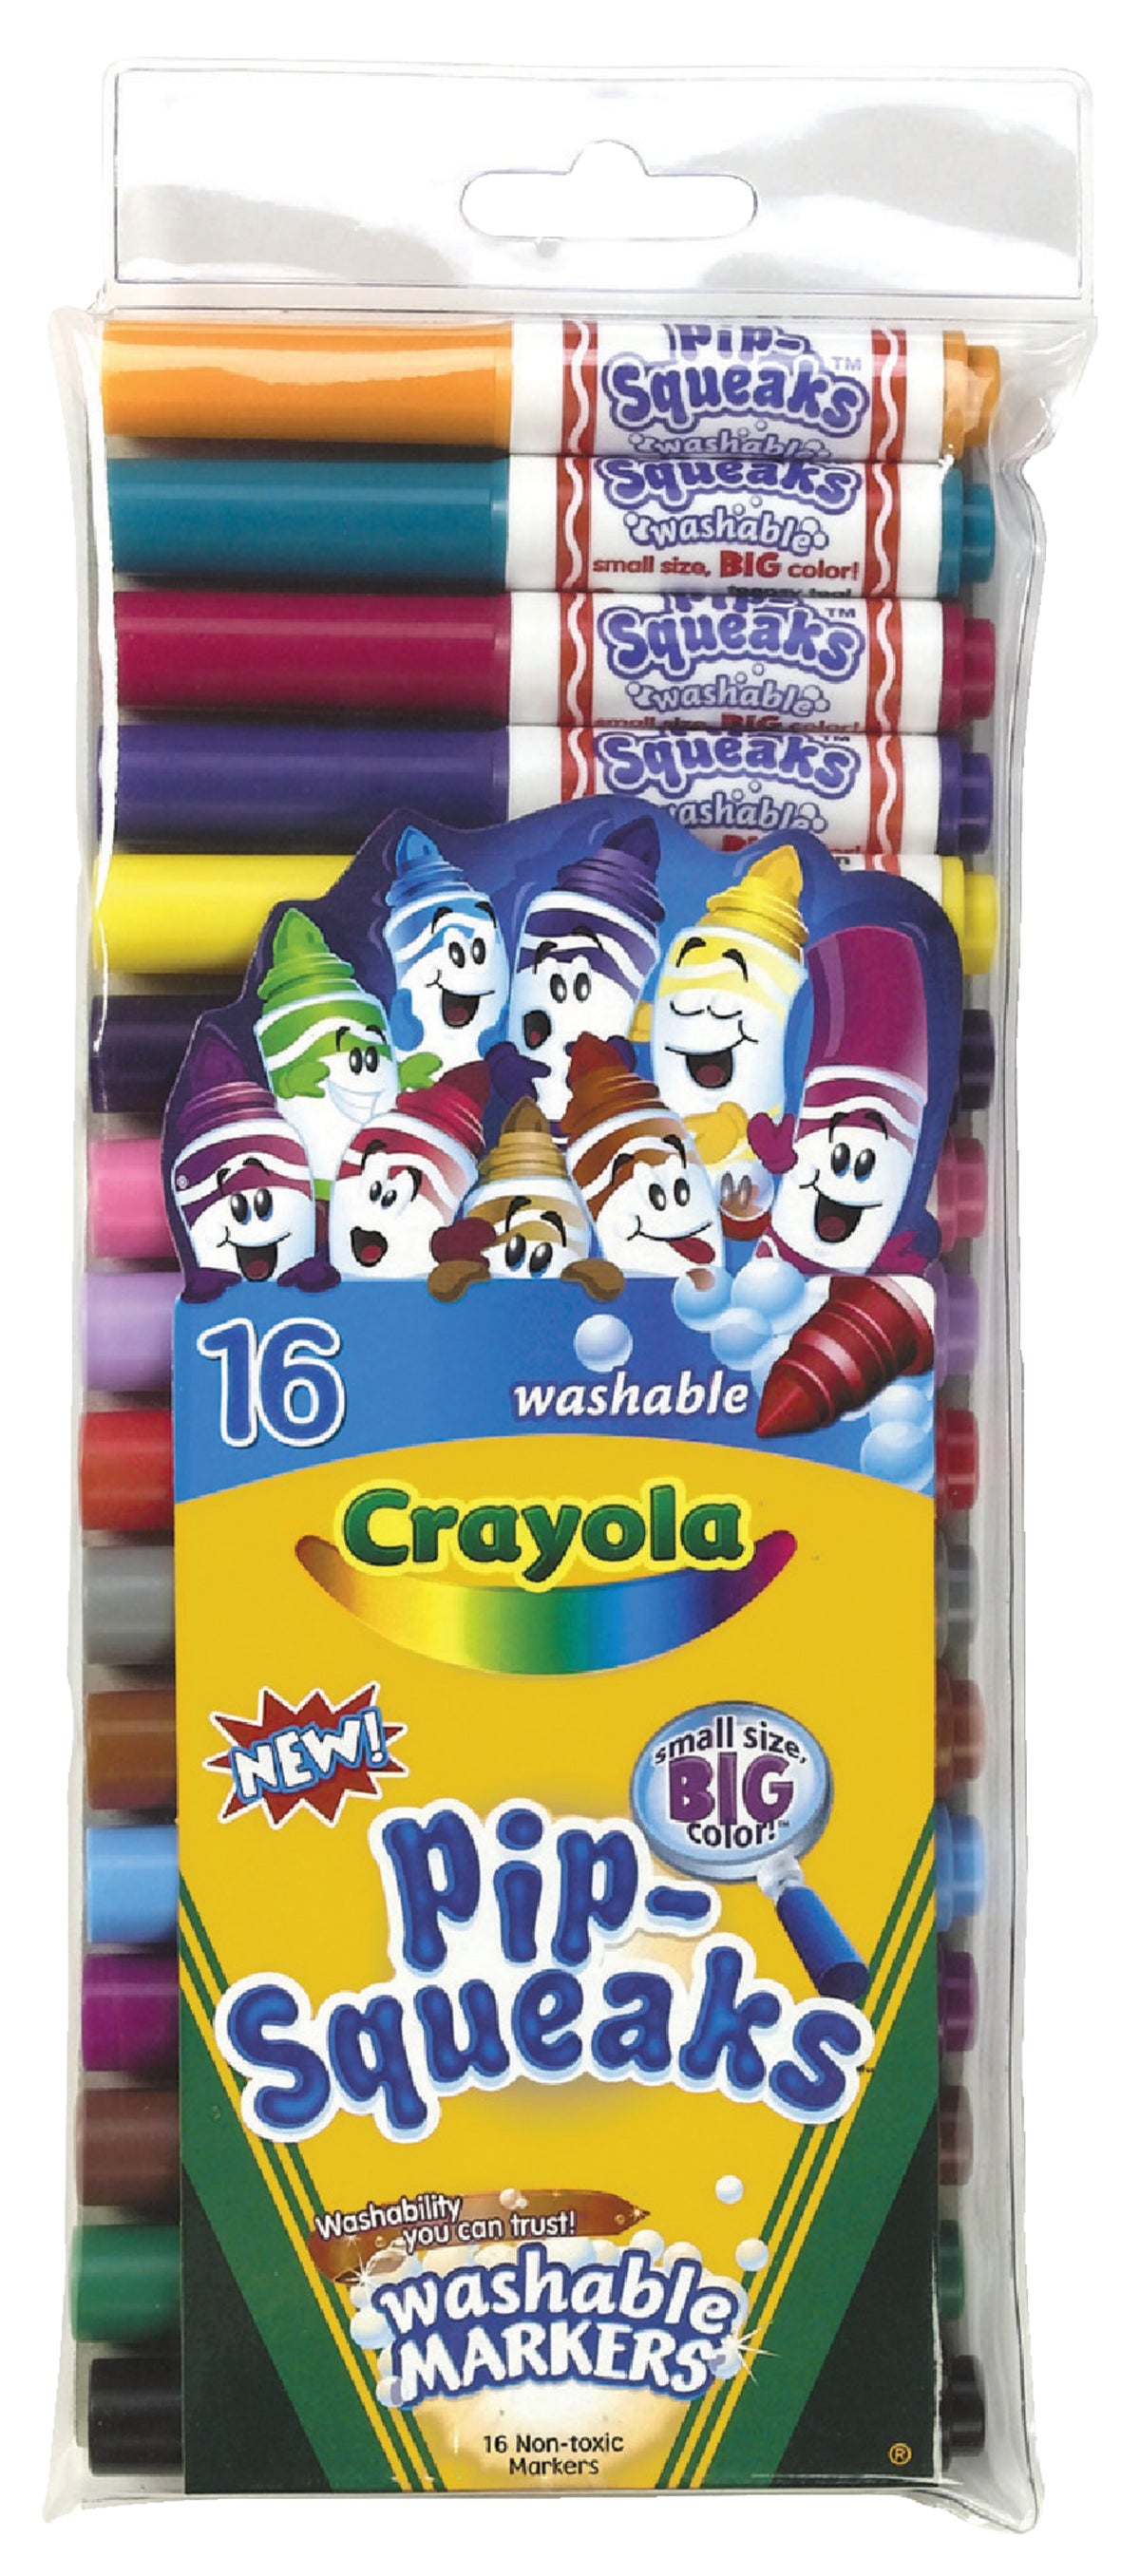 Crayola Pip-Squeaks Mini Non-Toxic Washable Marker, Conical Tip, 4